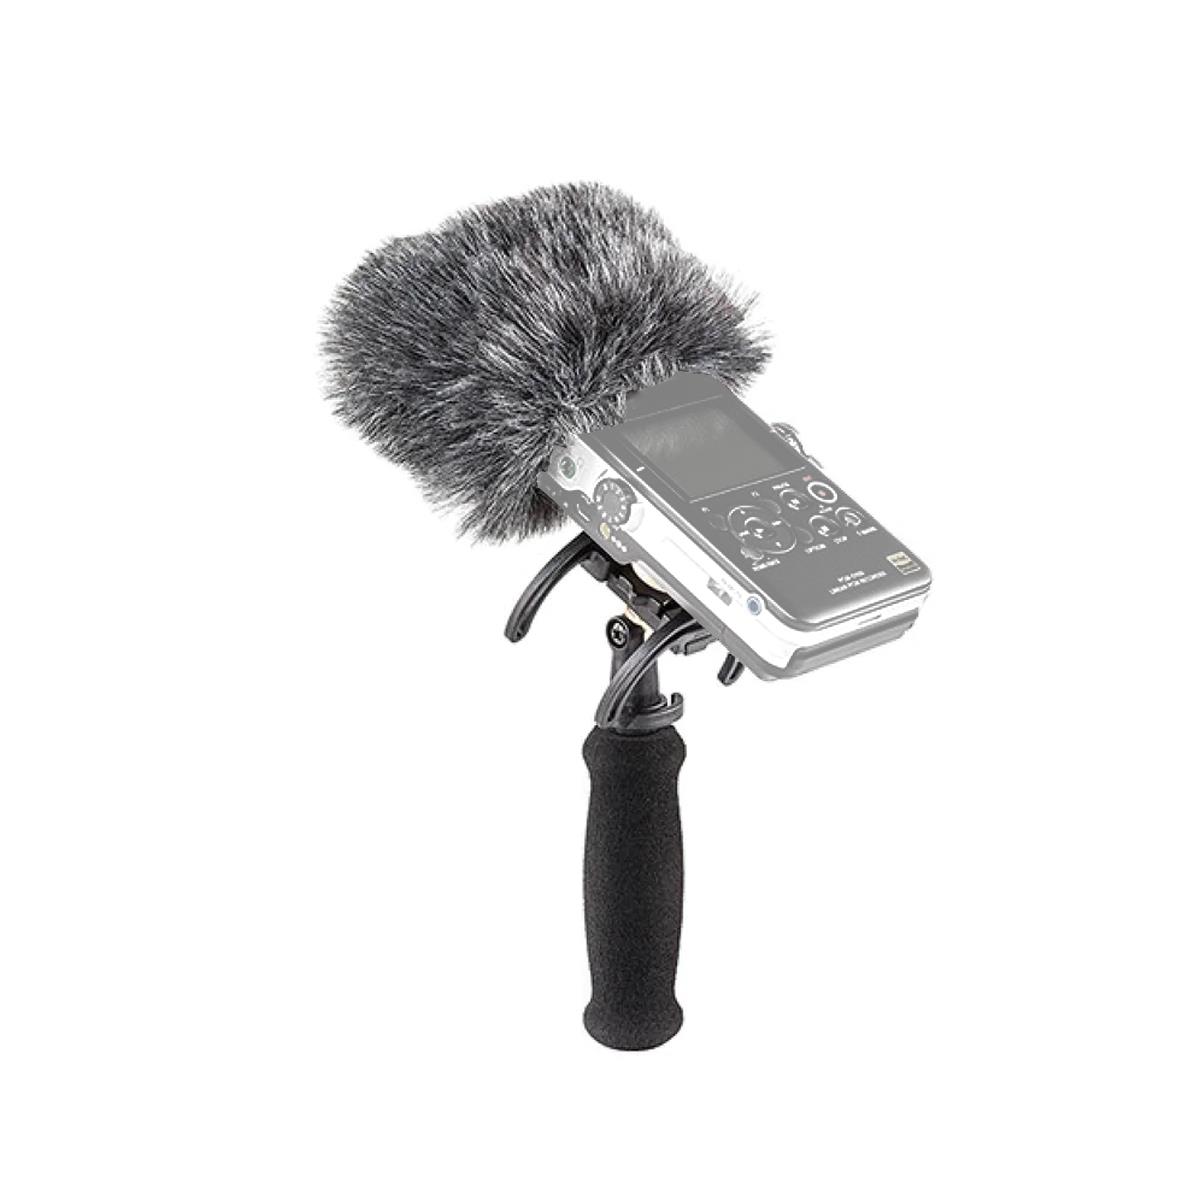 Image of Rycote Windshield and Suspension Kit for Sony PCM-D100 Portable Recorder